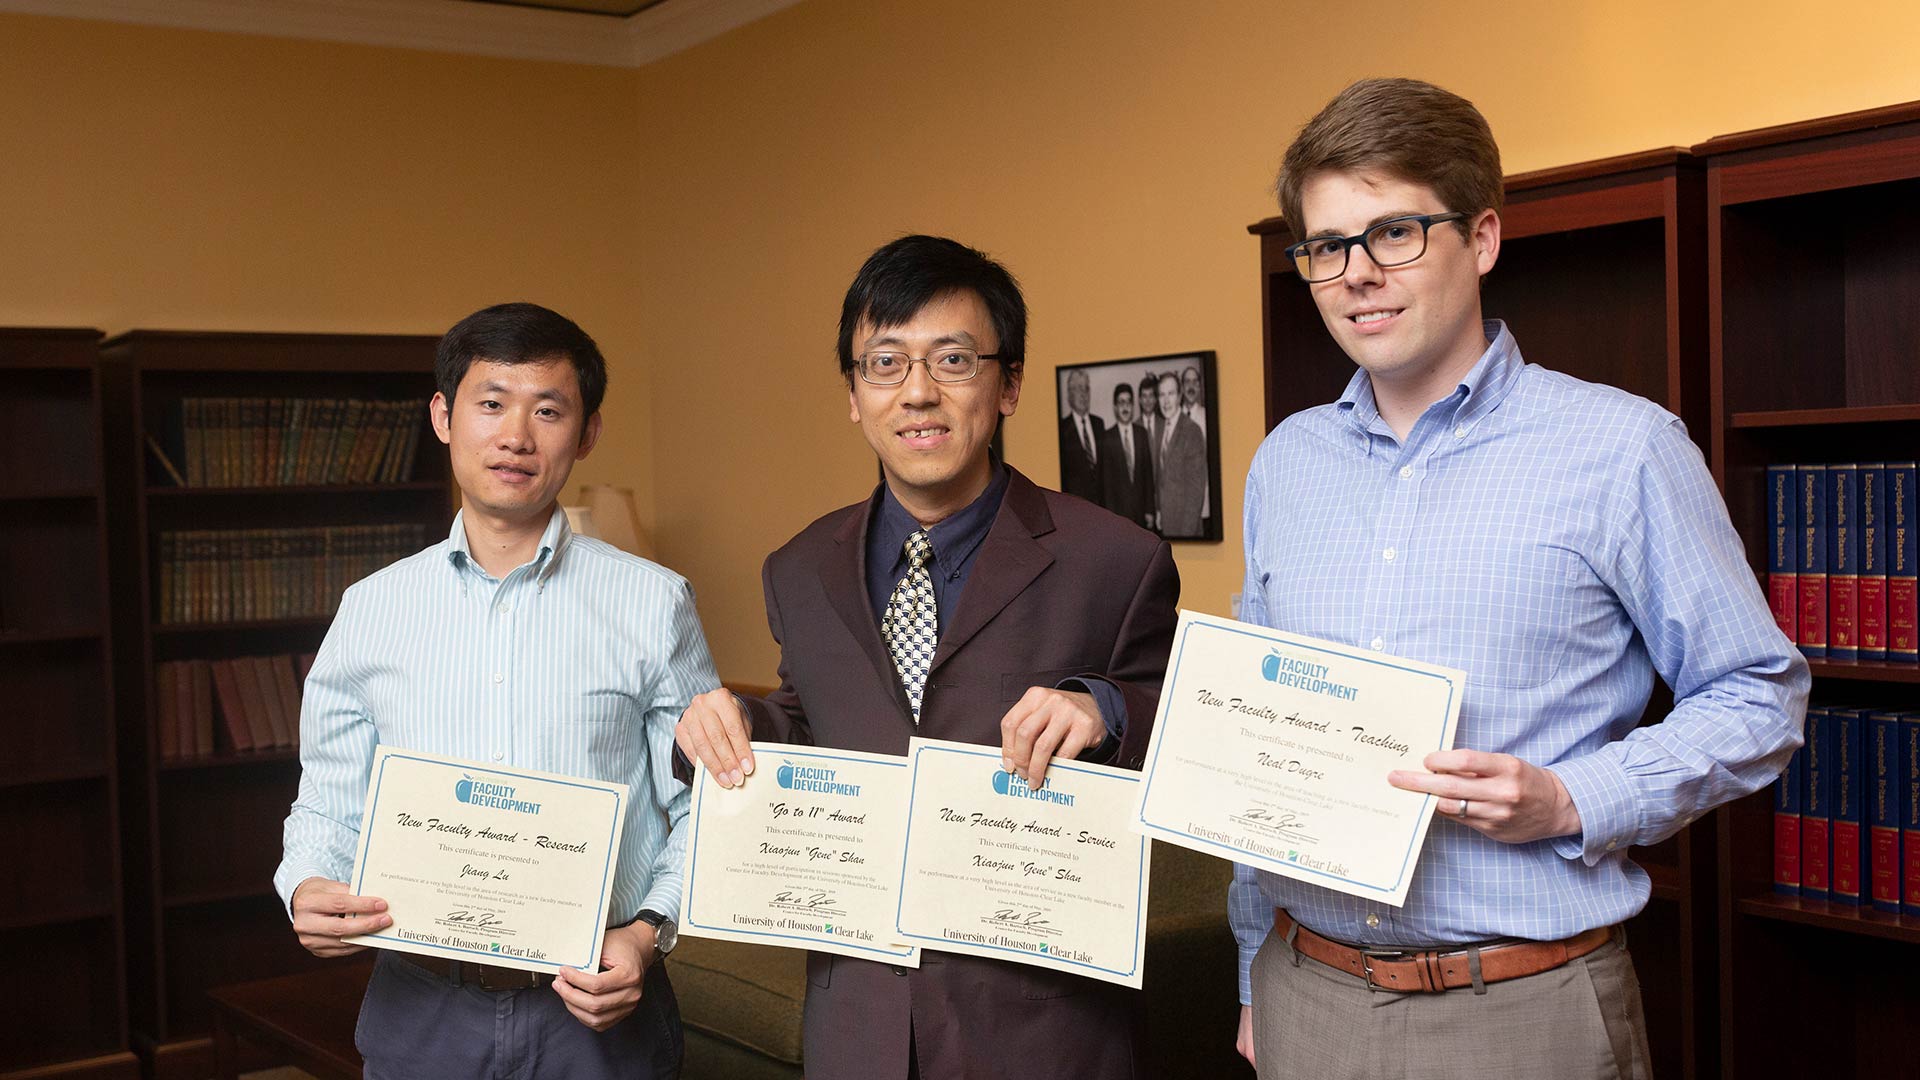 Three faculty members holding certificates